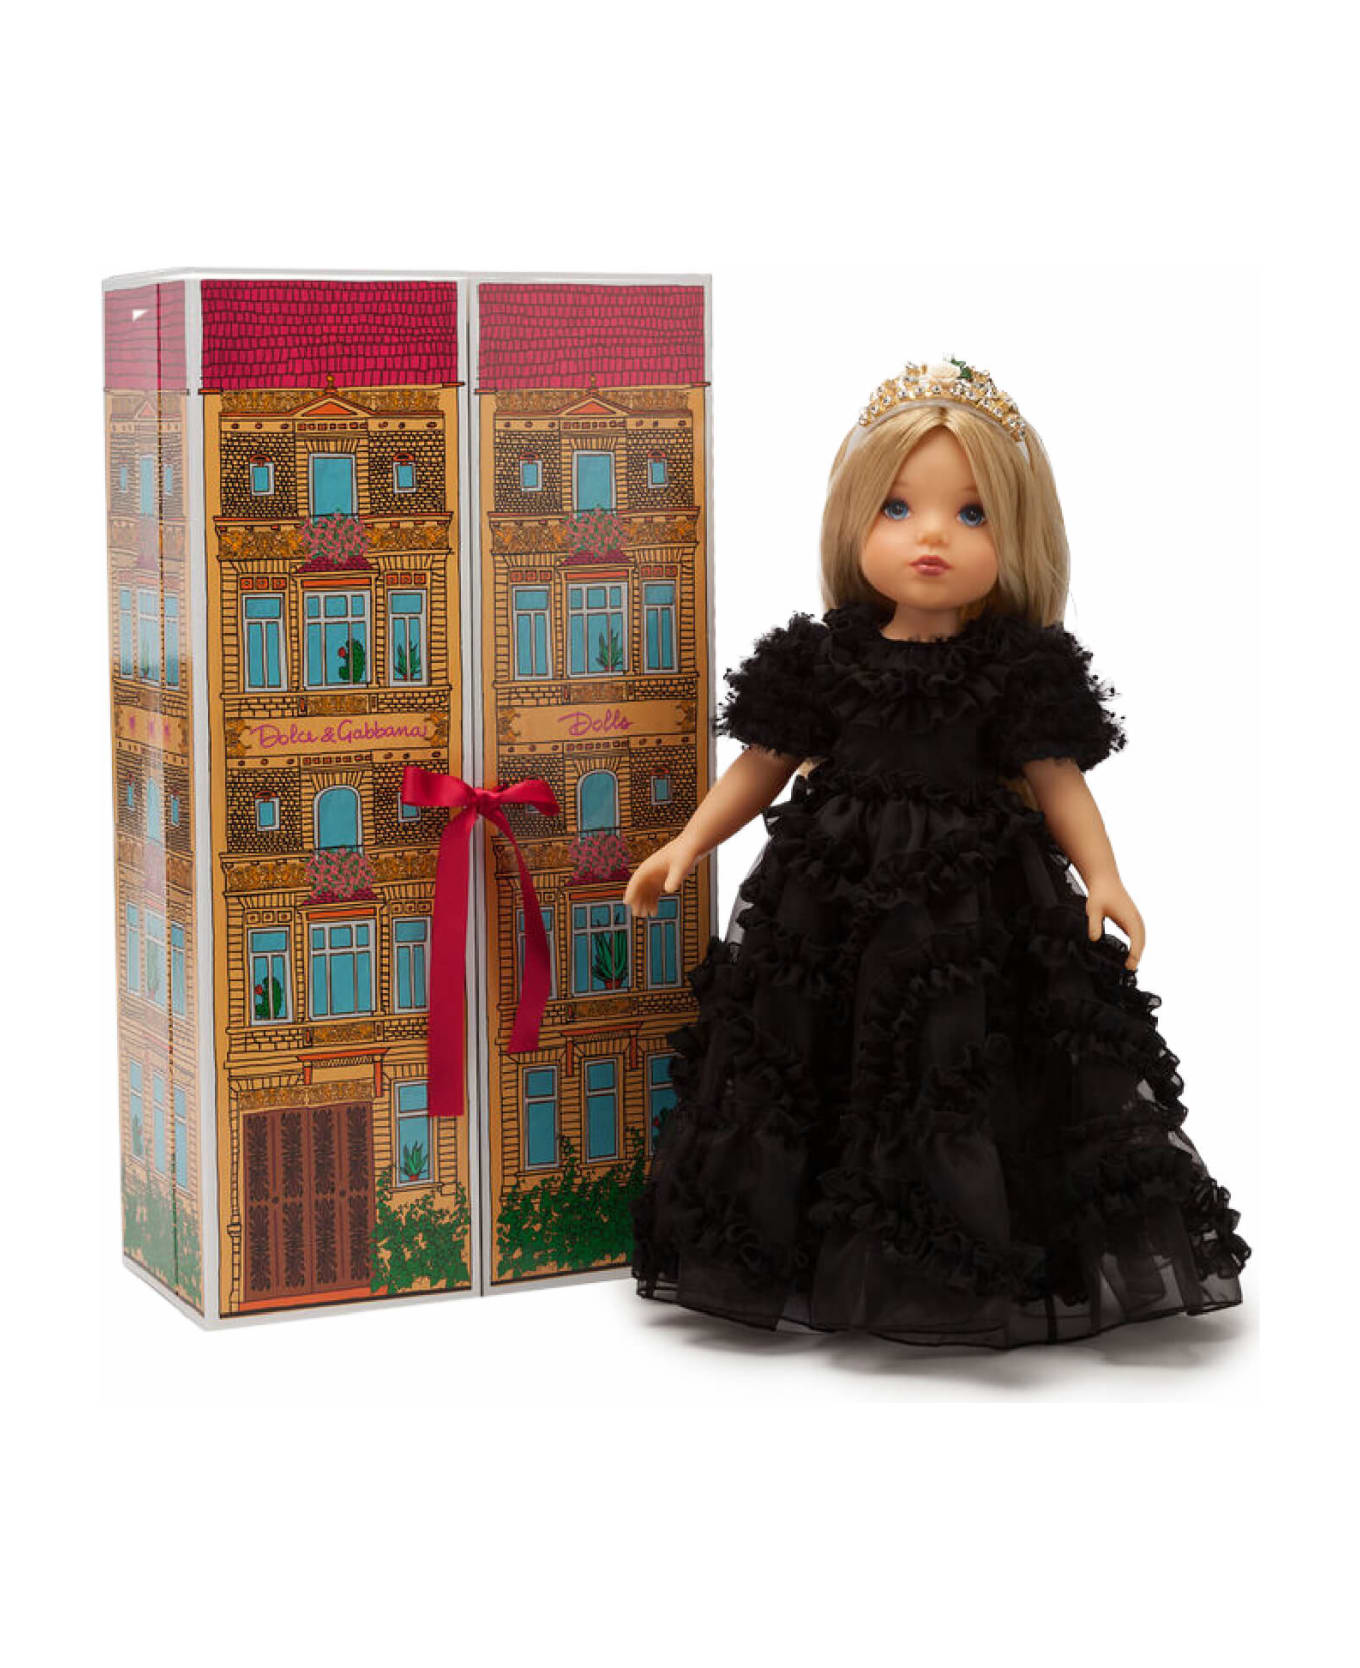 Dolce & Gabbana Colorful Doll For Girl With Black Dress